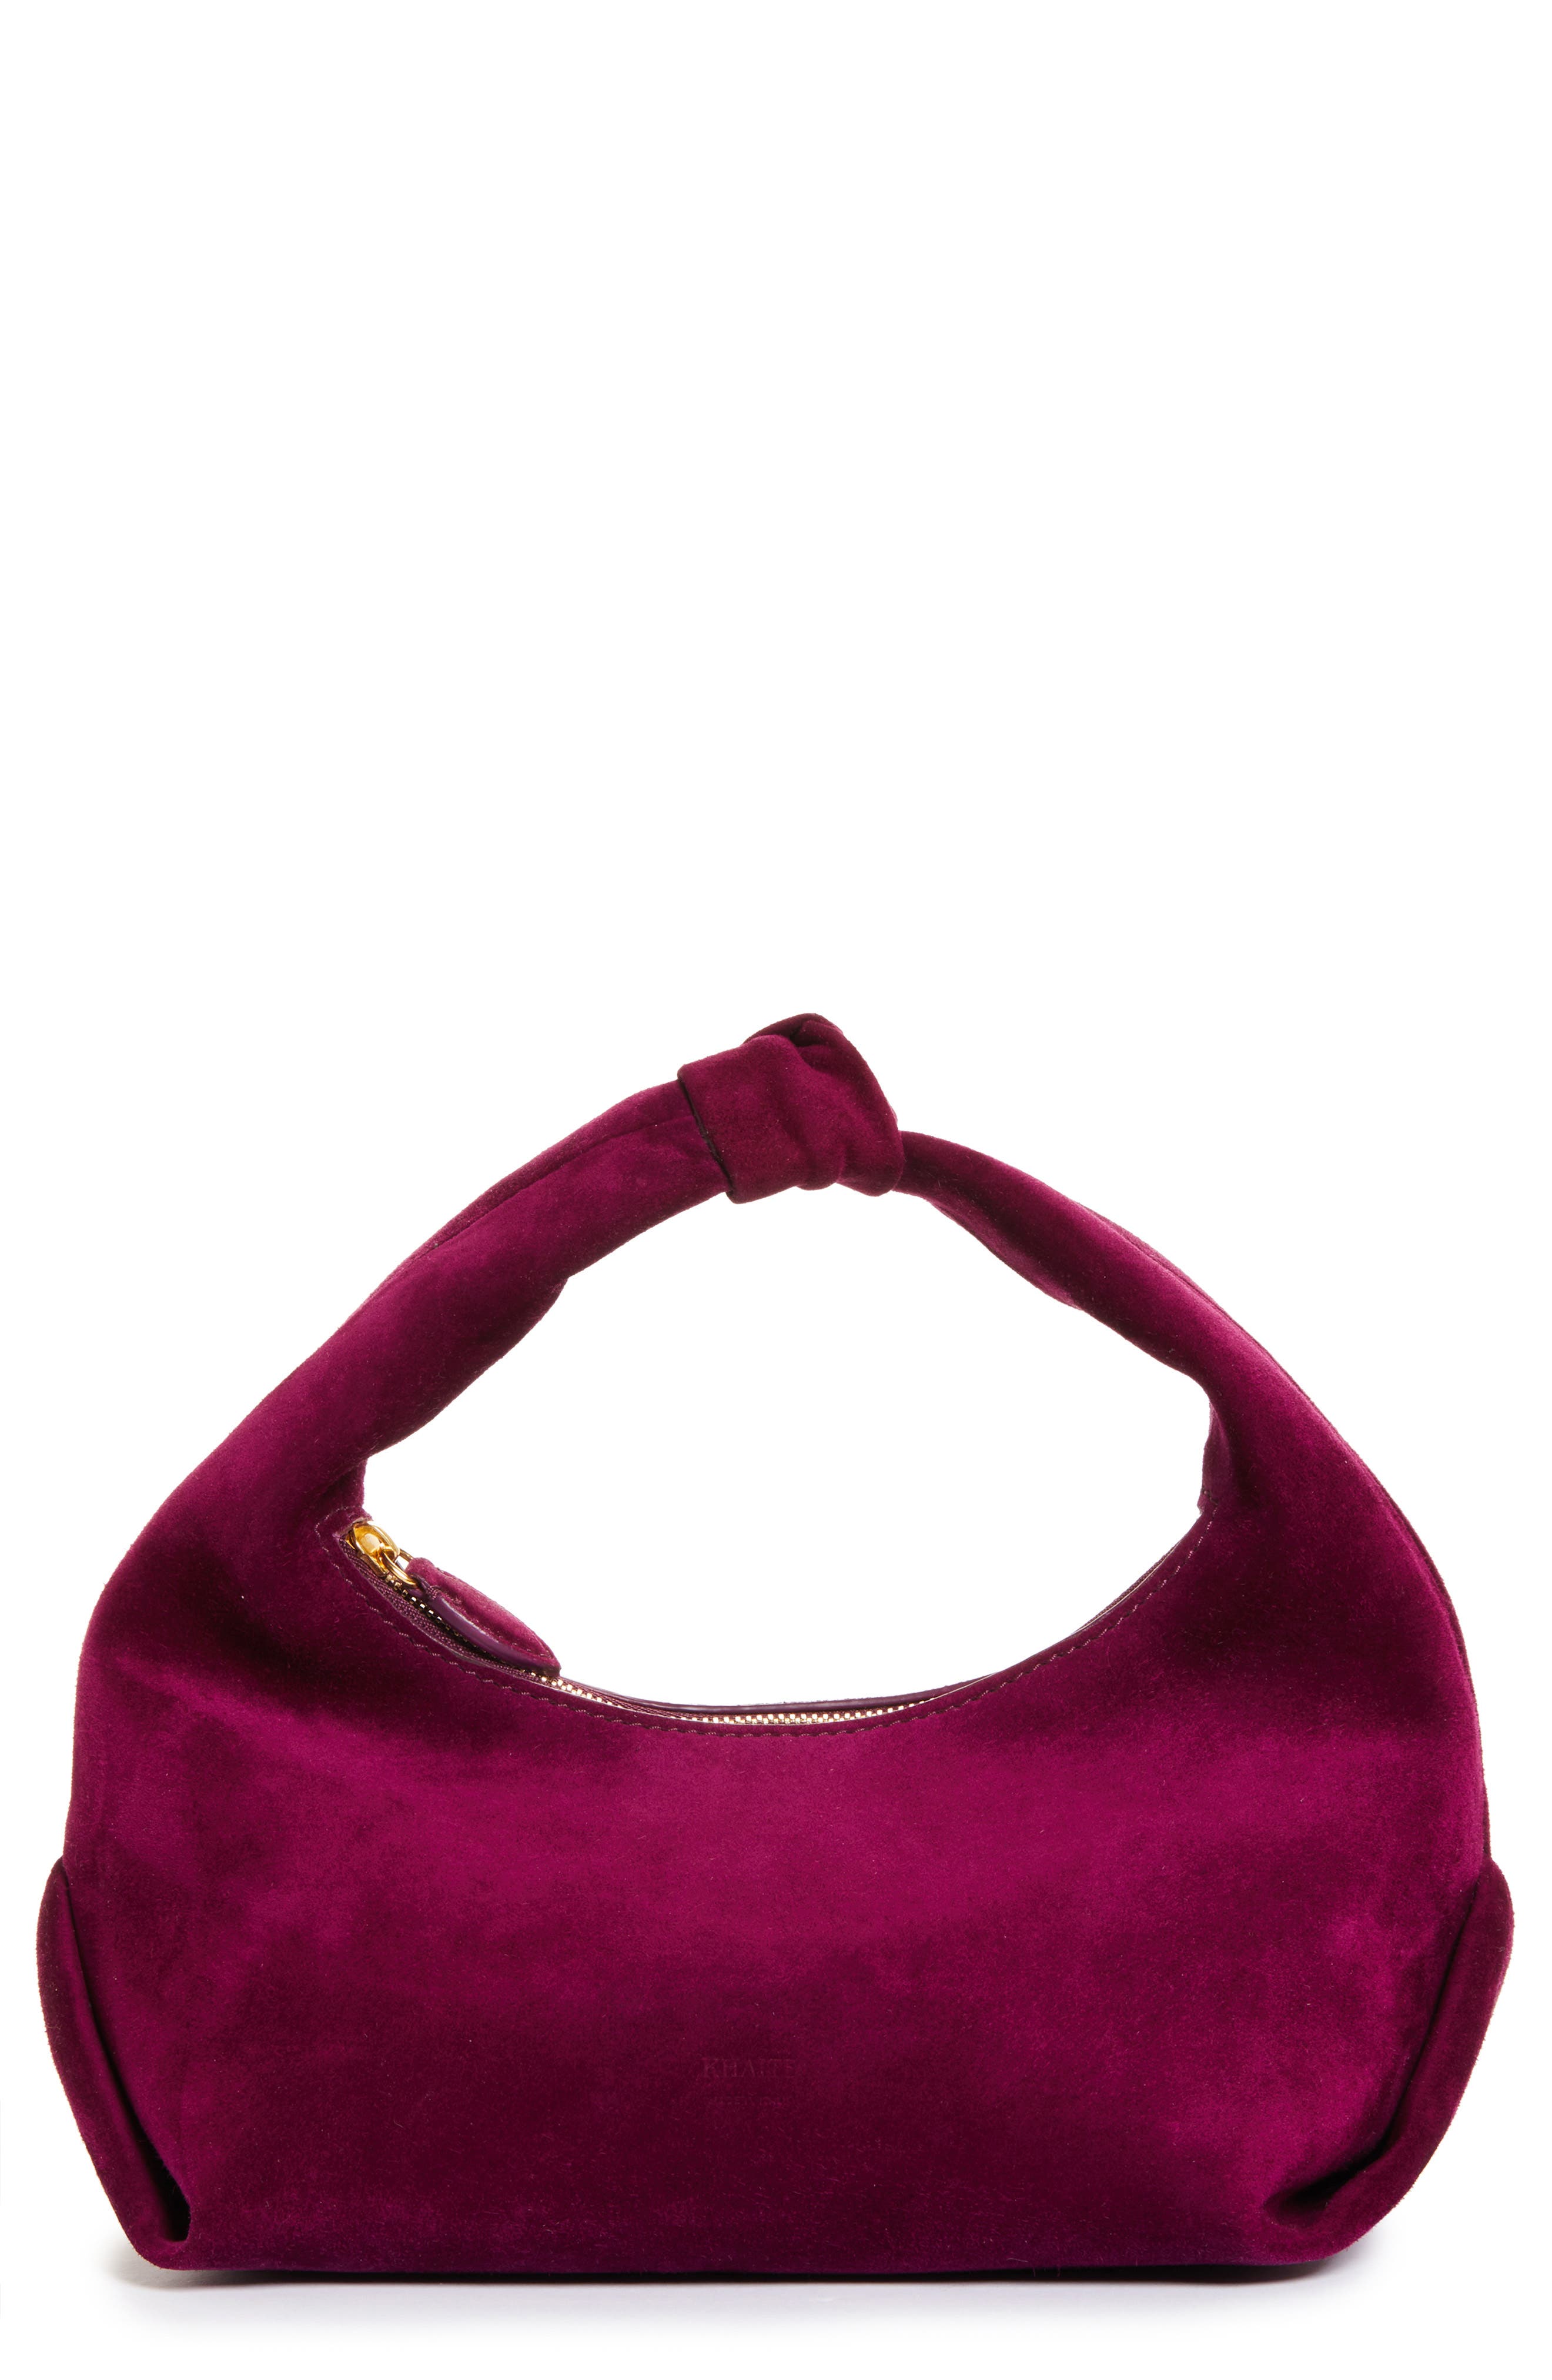 Khaite Small Beatrice Suede Hobo Bag in Purple at Nordstrom